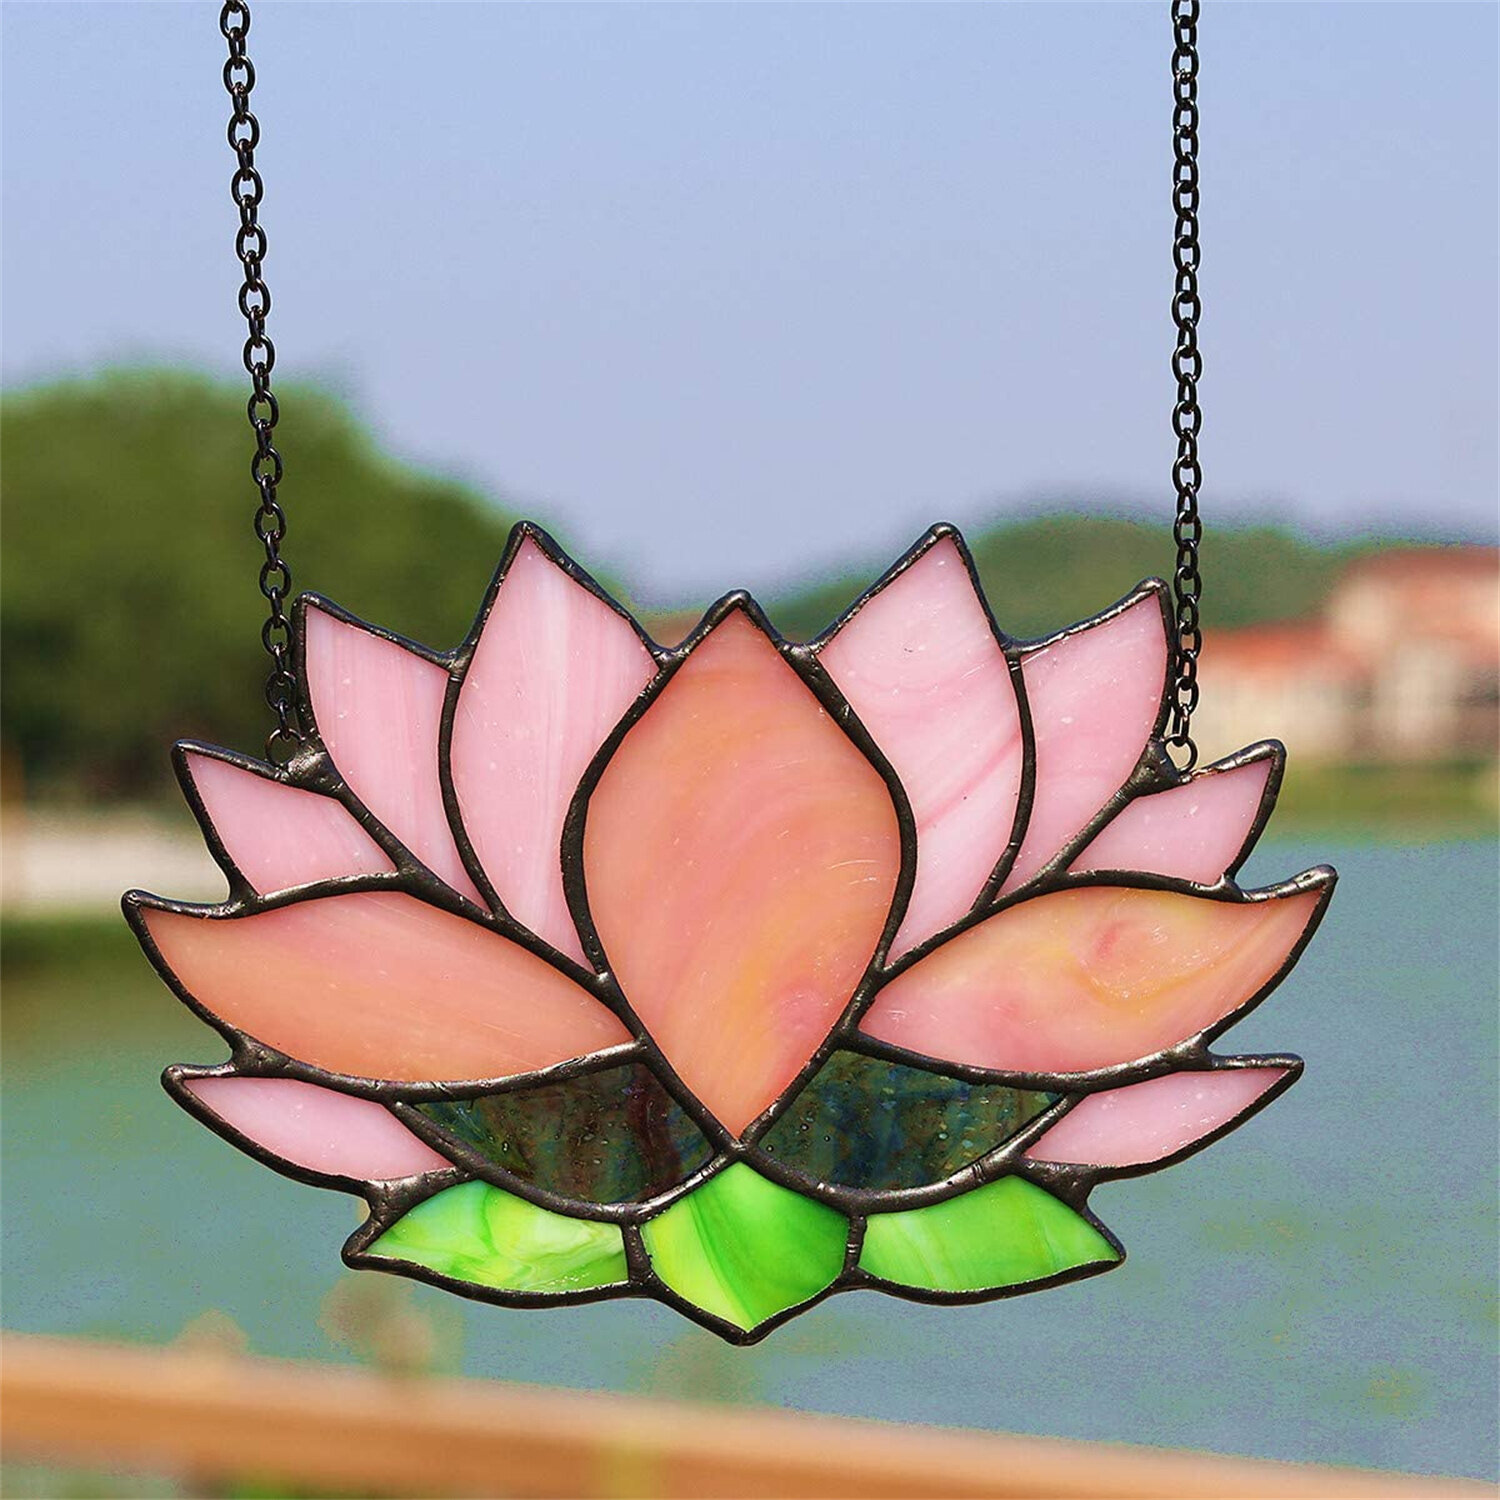 Stained glass lily suncatcher flower windows hangings decoration 